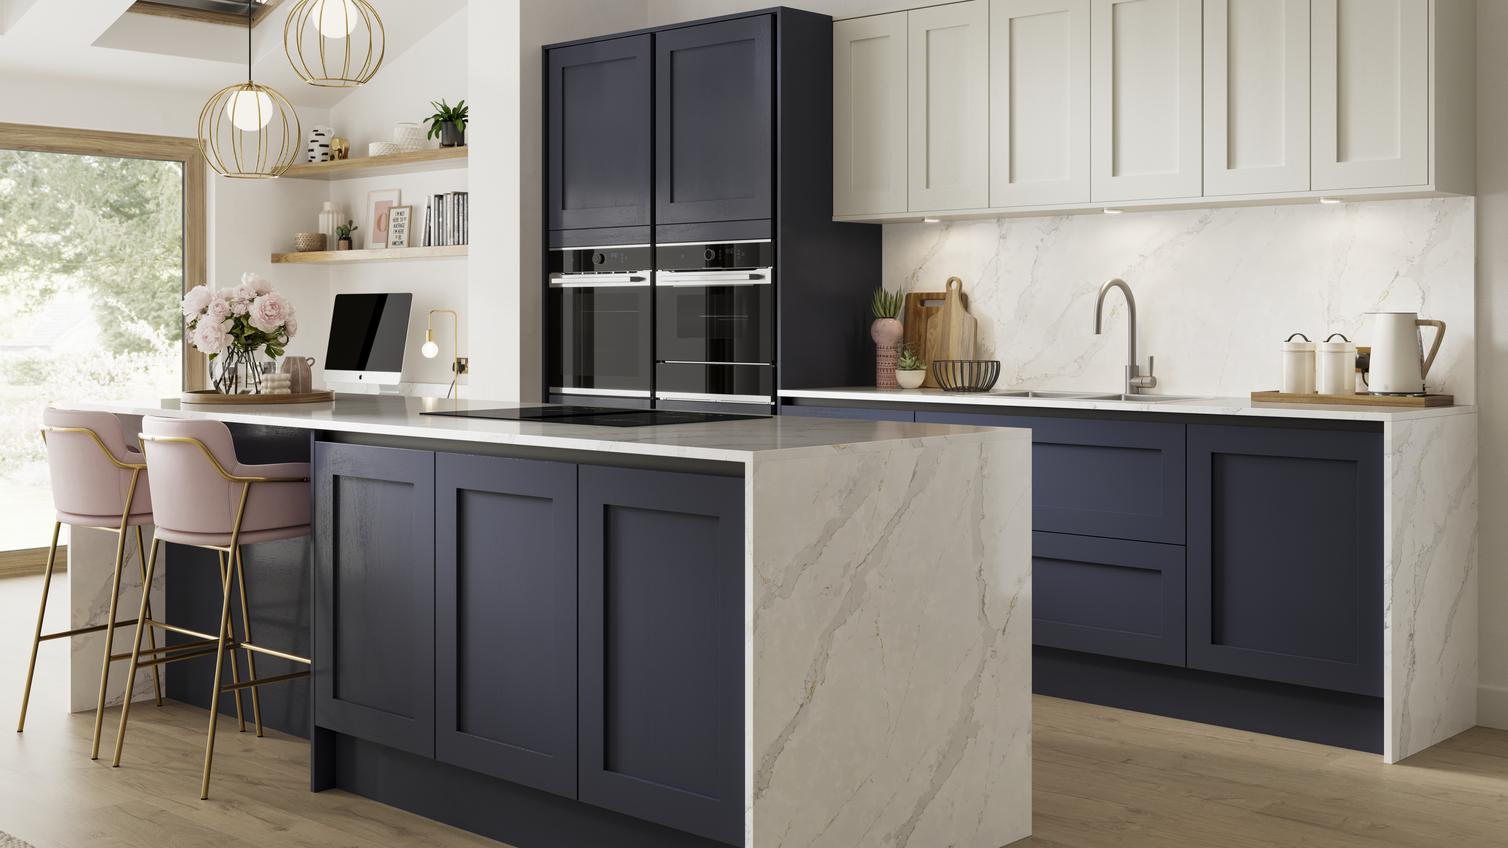 Handleless two-tone shaker kitchen with white and navy doors. Includes white marble worktops and a single-lever chrome tap